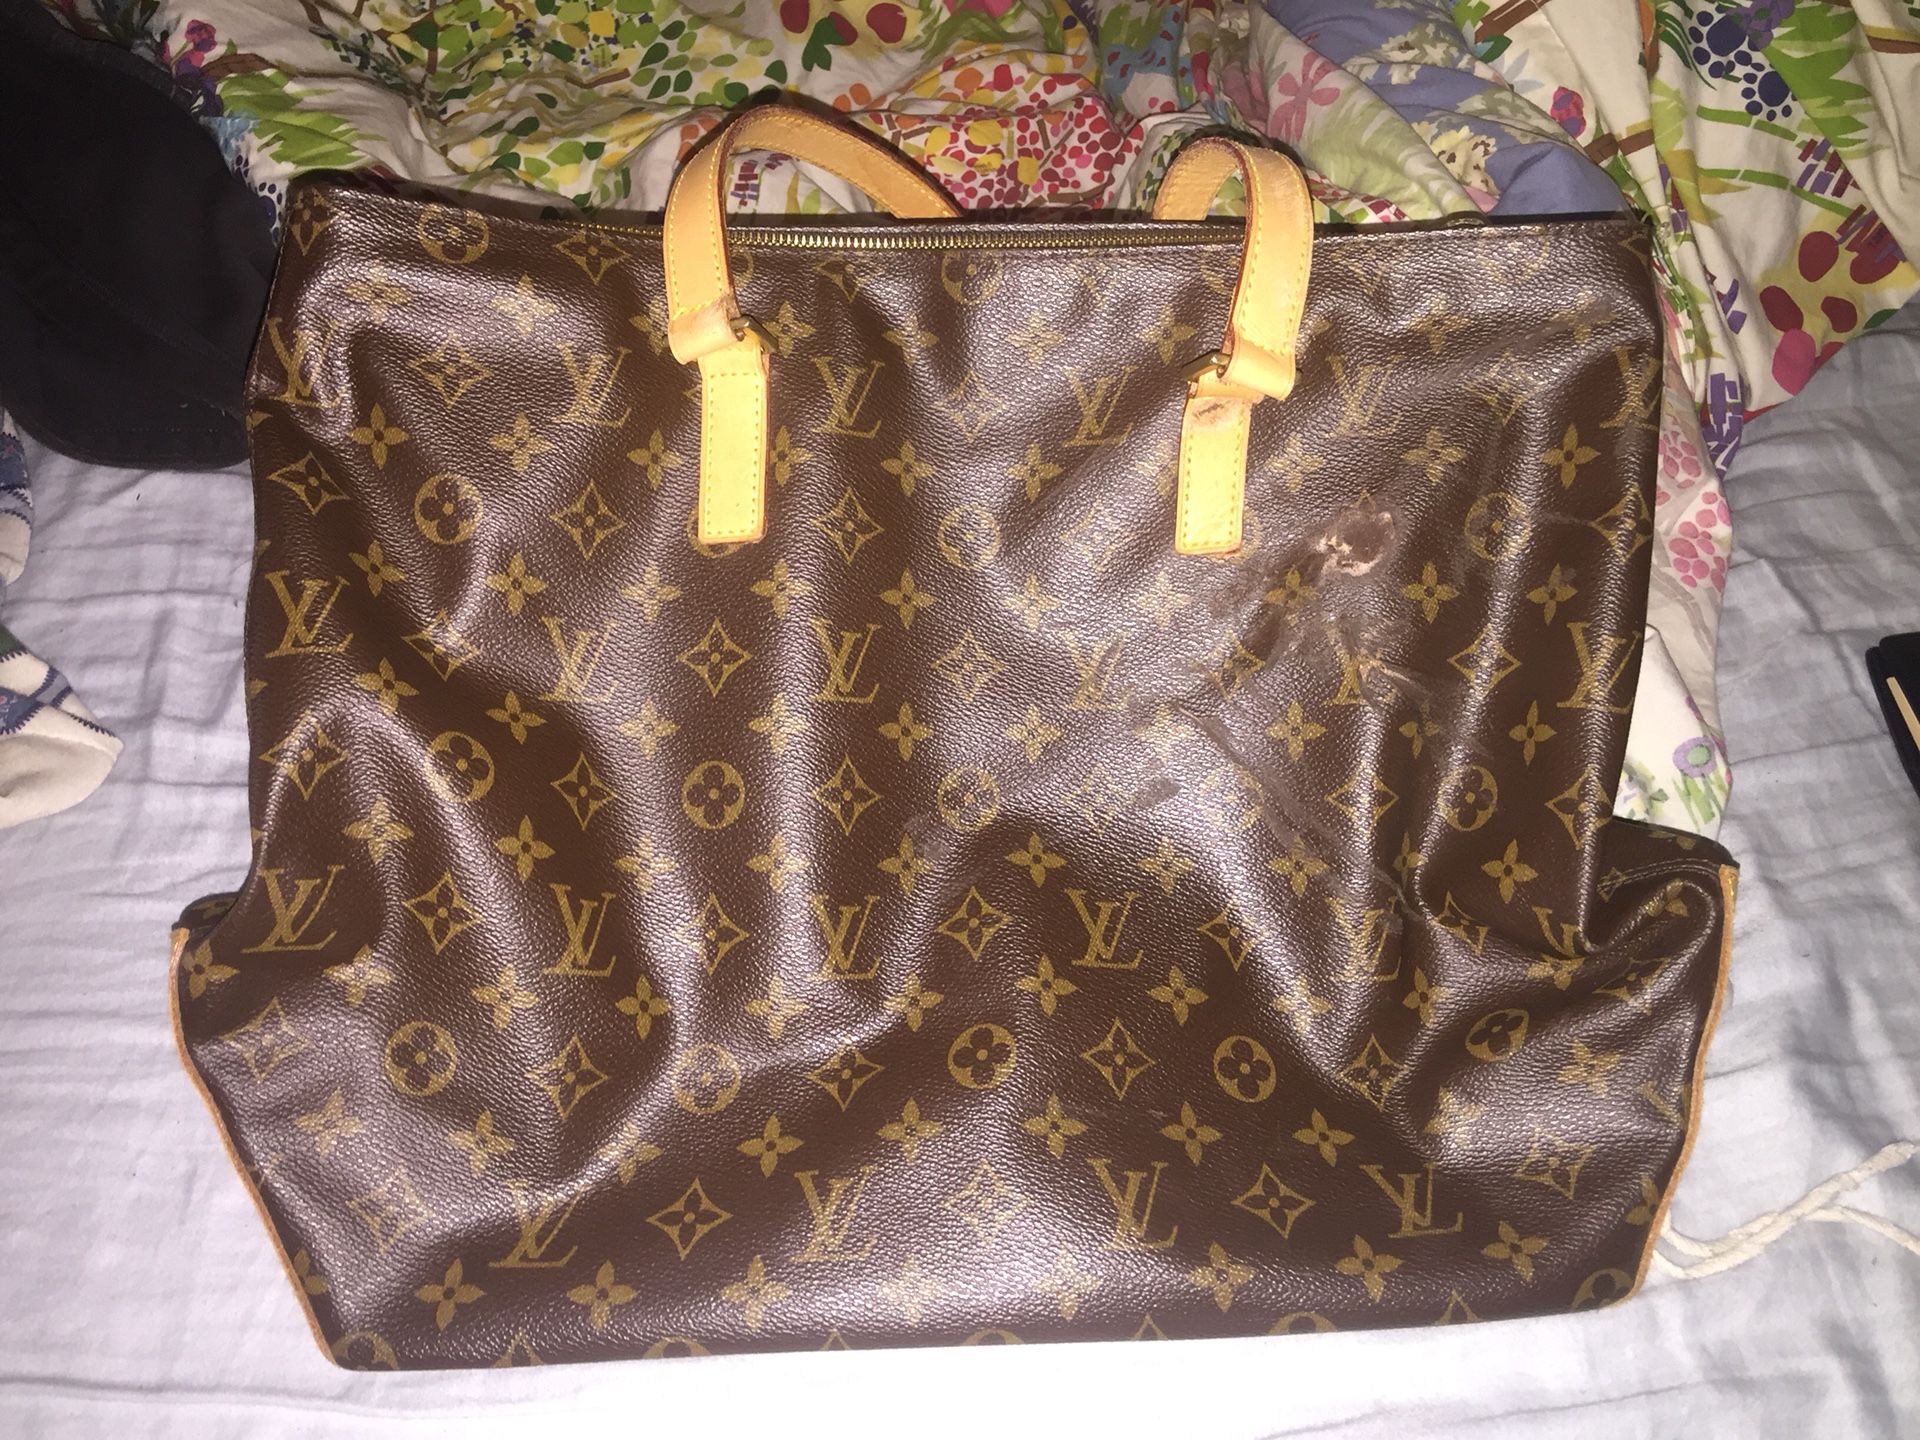 Louis Vuitton Cabas Piano Tote Bag V10072 for Sale in Pasadena, TX - OfferUp